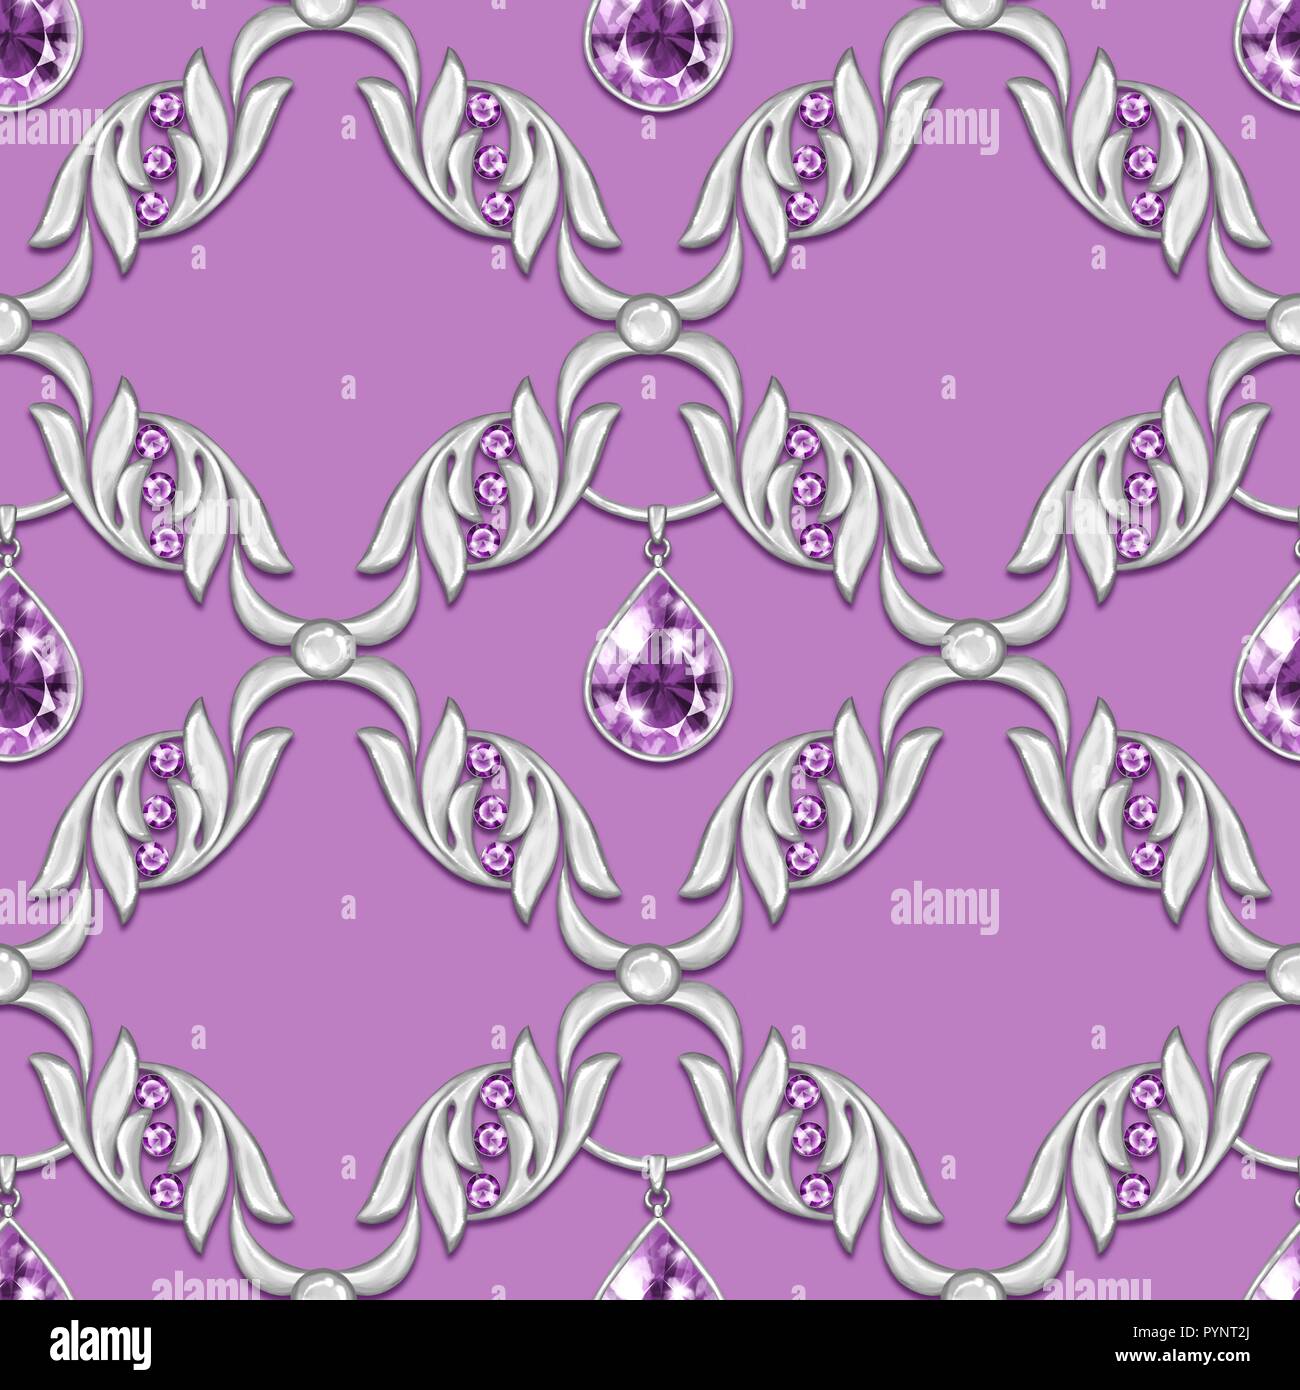 Seamless pattern with gems and silver scrolls Stock Photo